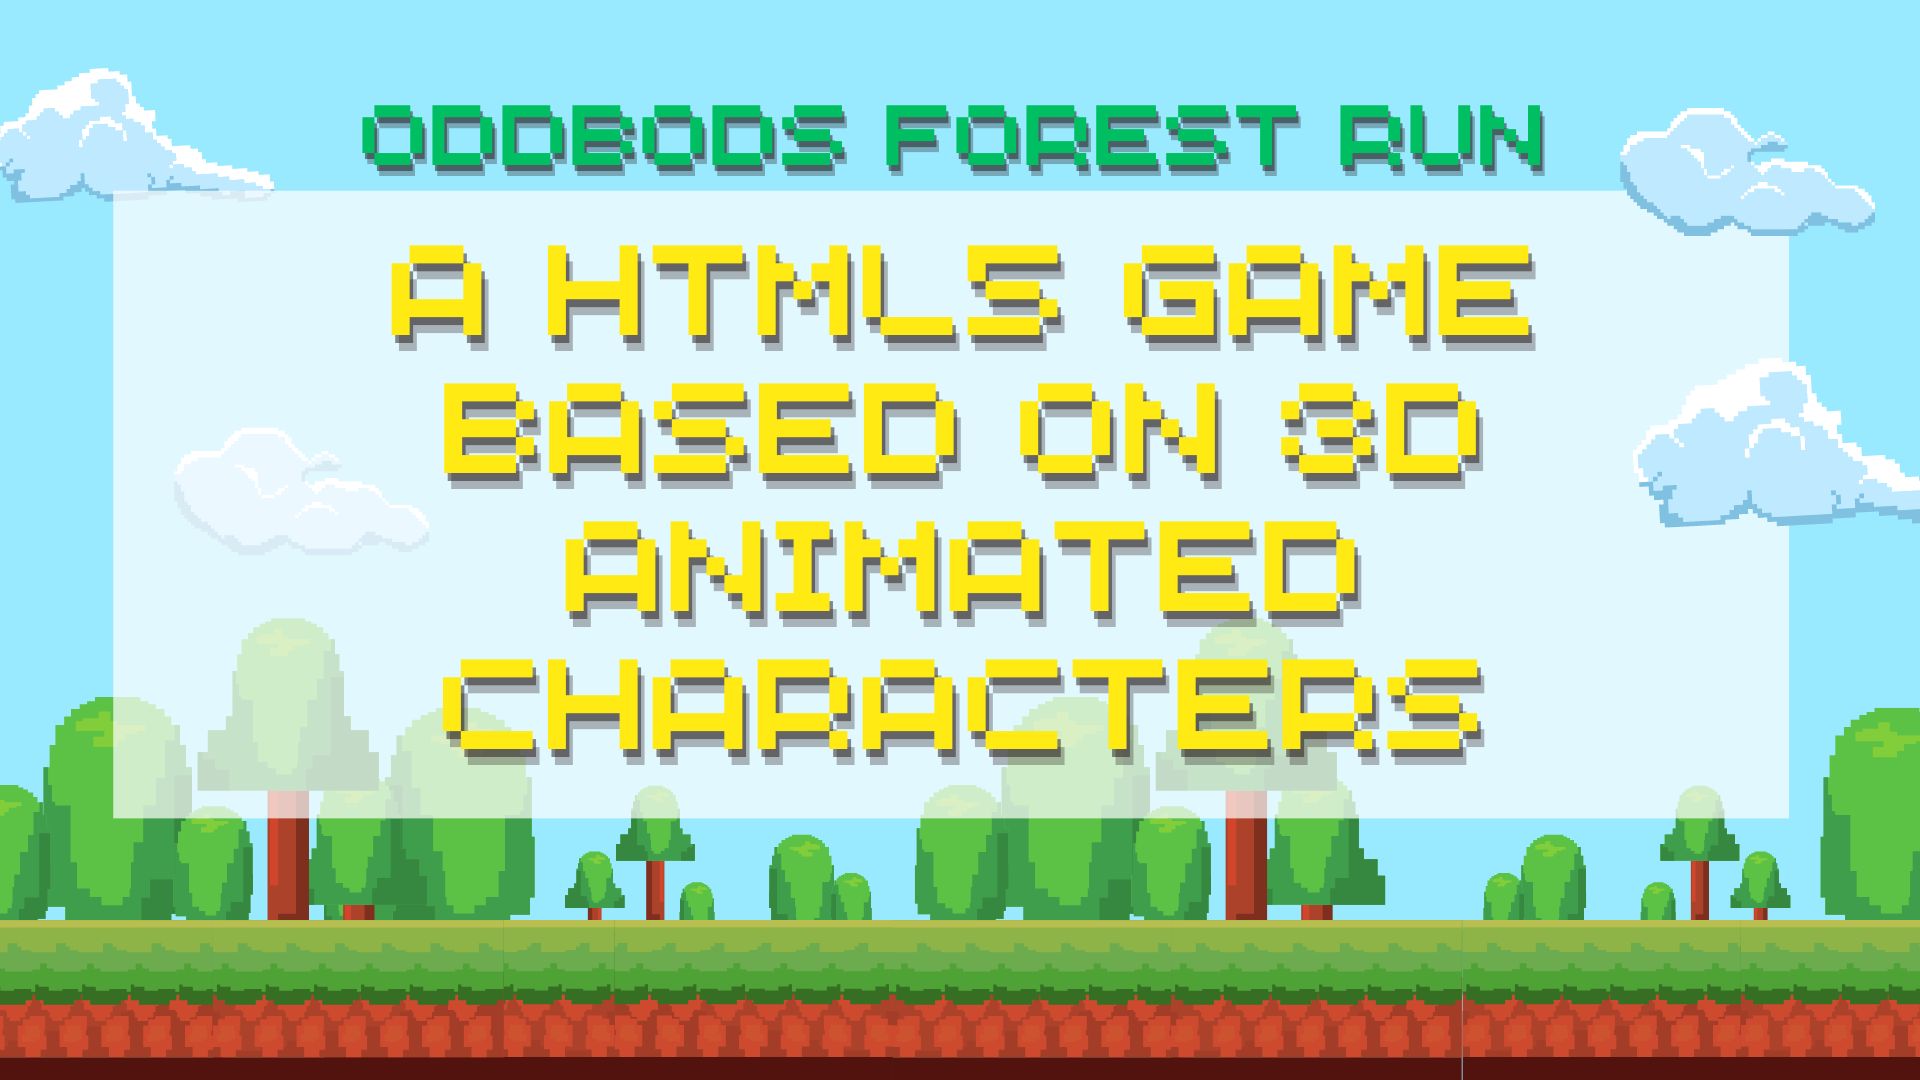 Oddbods Forest Run - A HTML5 Game Based On 3D Animated Characters